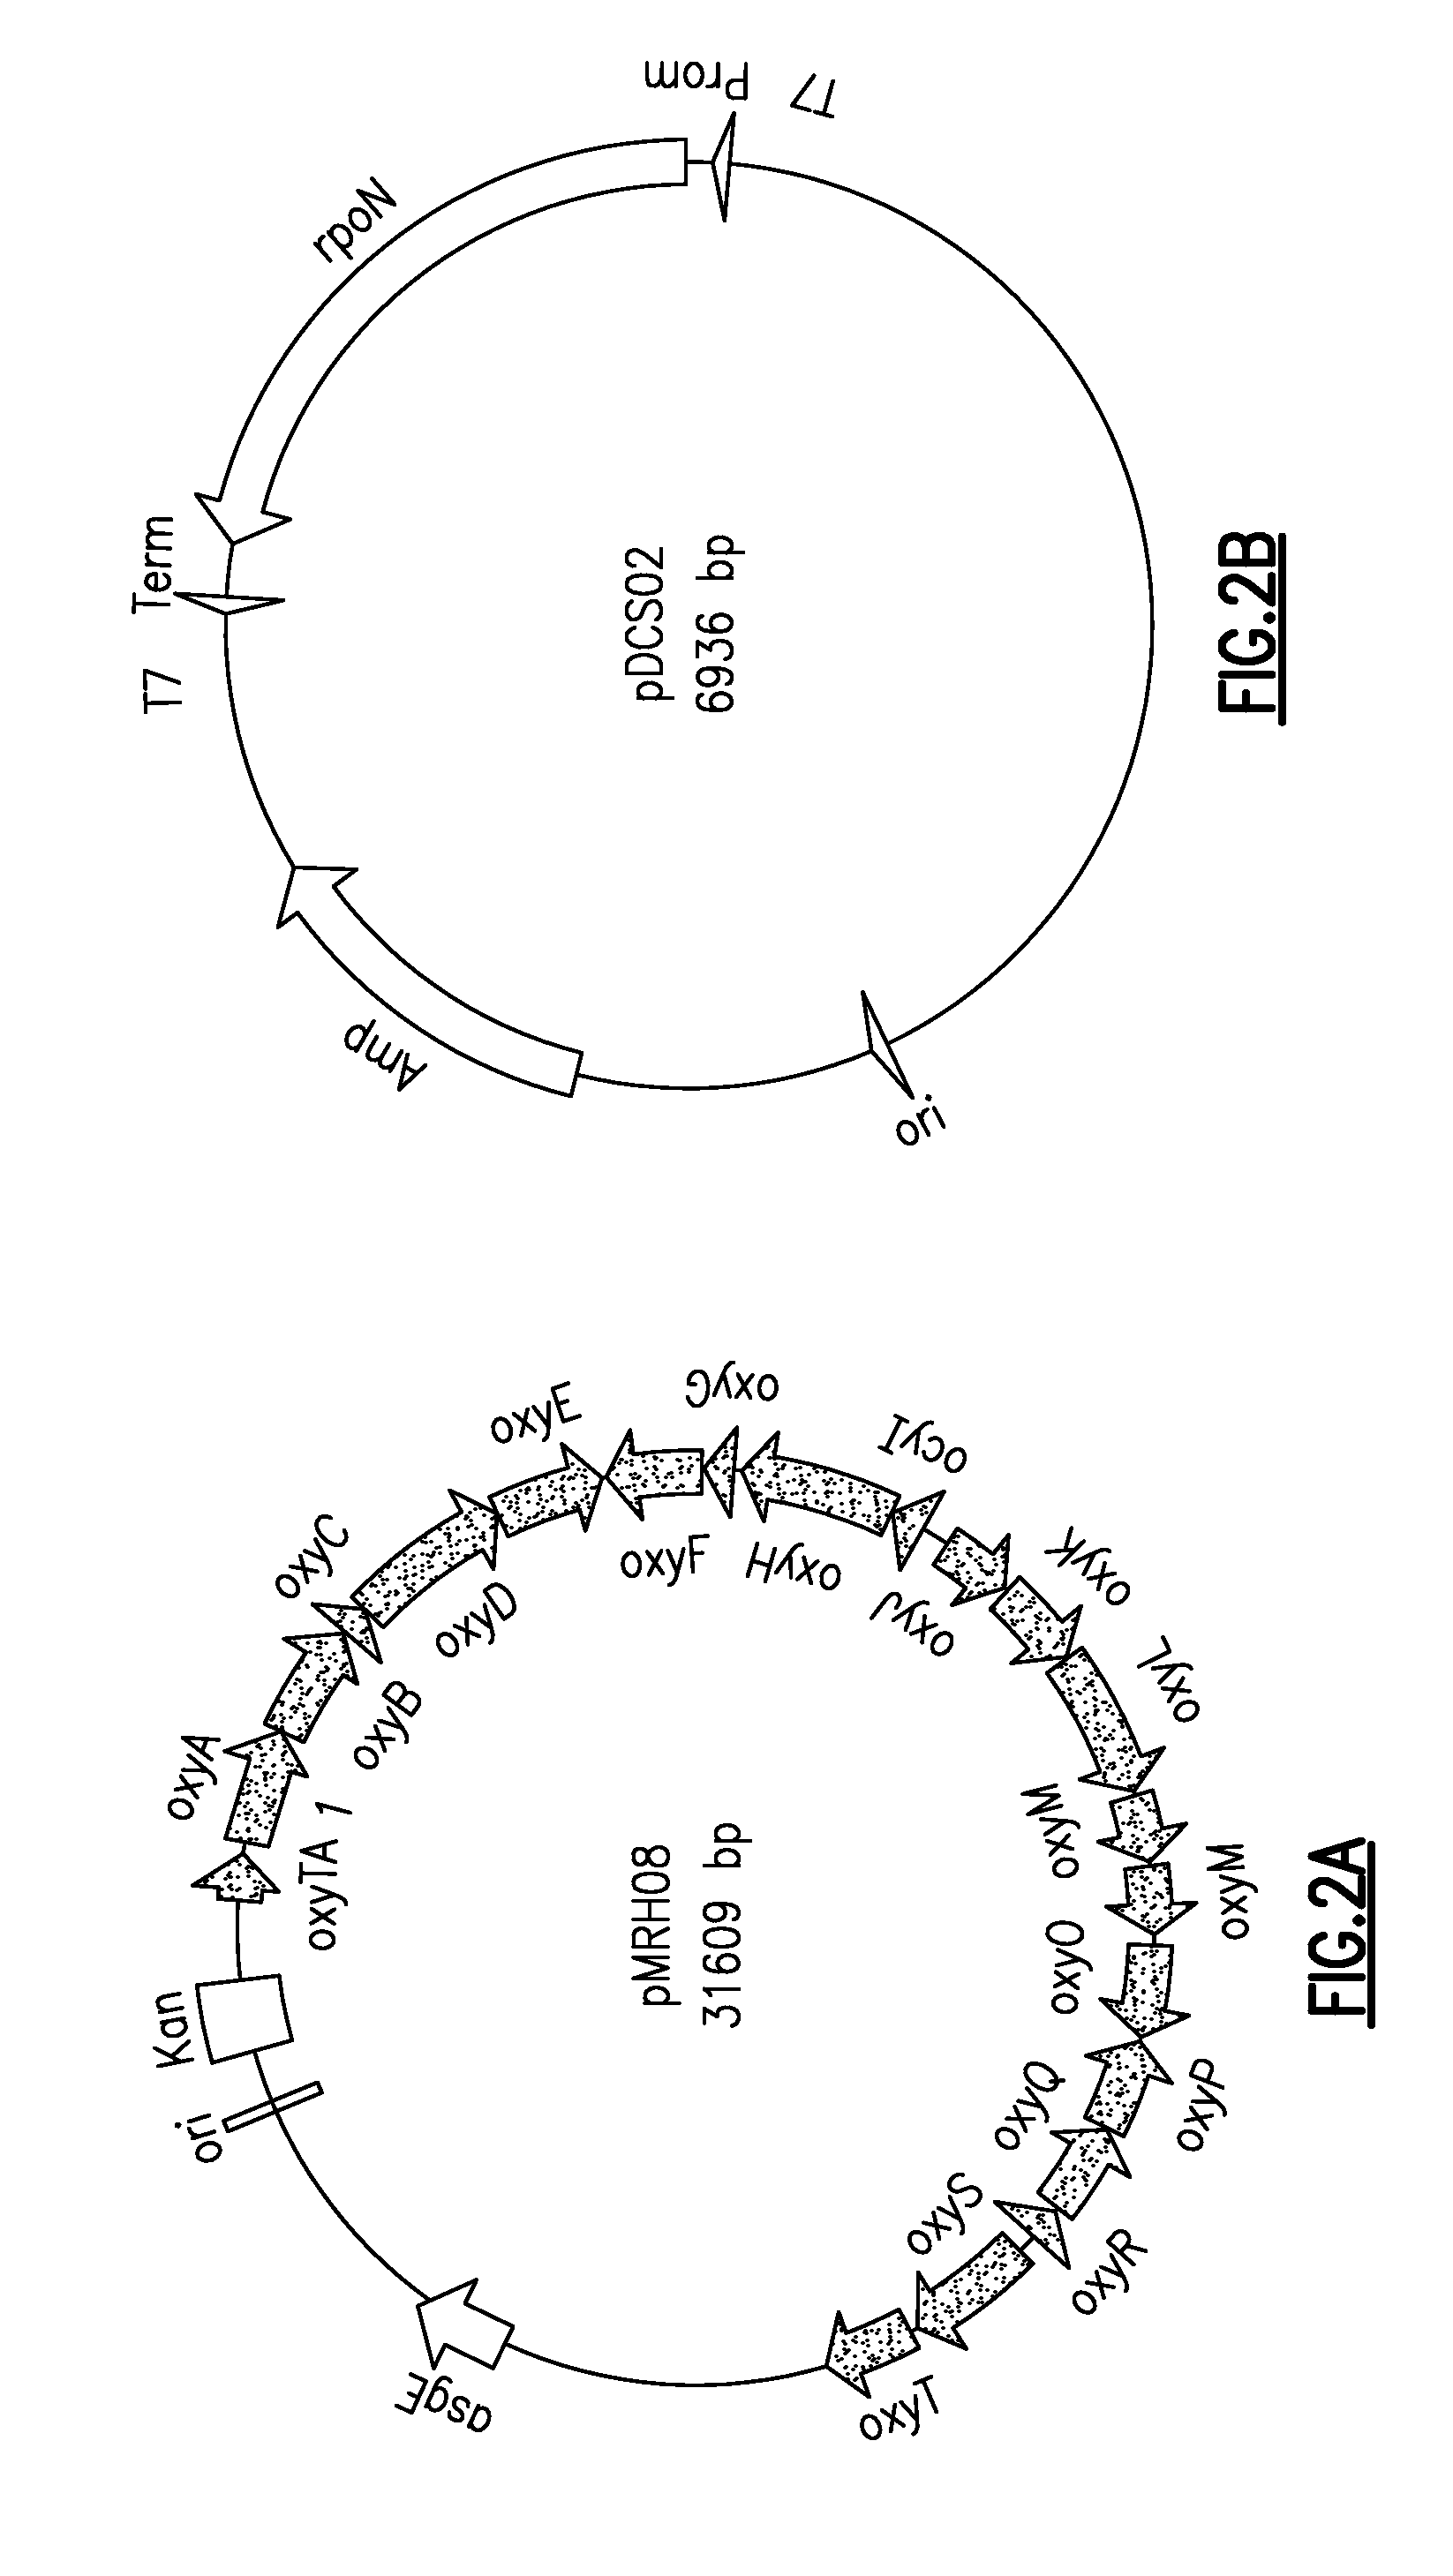 System and Method For the Heterologous Expression of Polyketide Synthase Gene Clusters